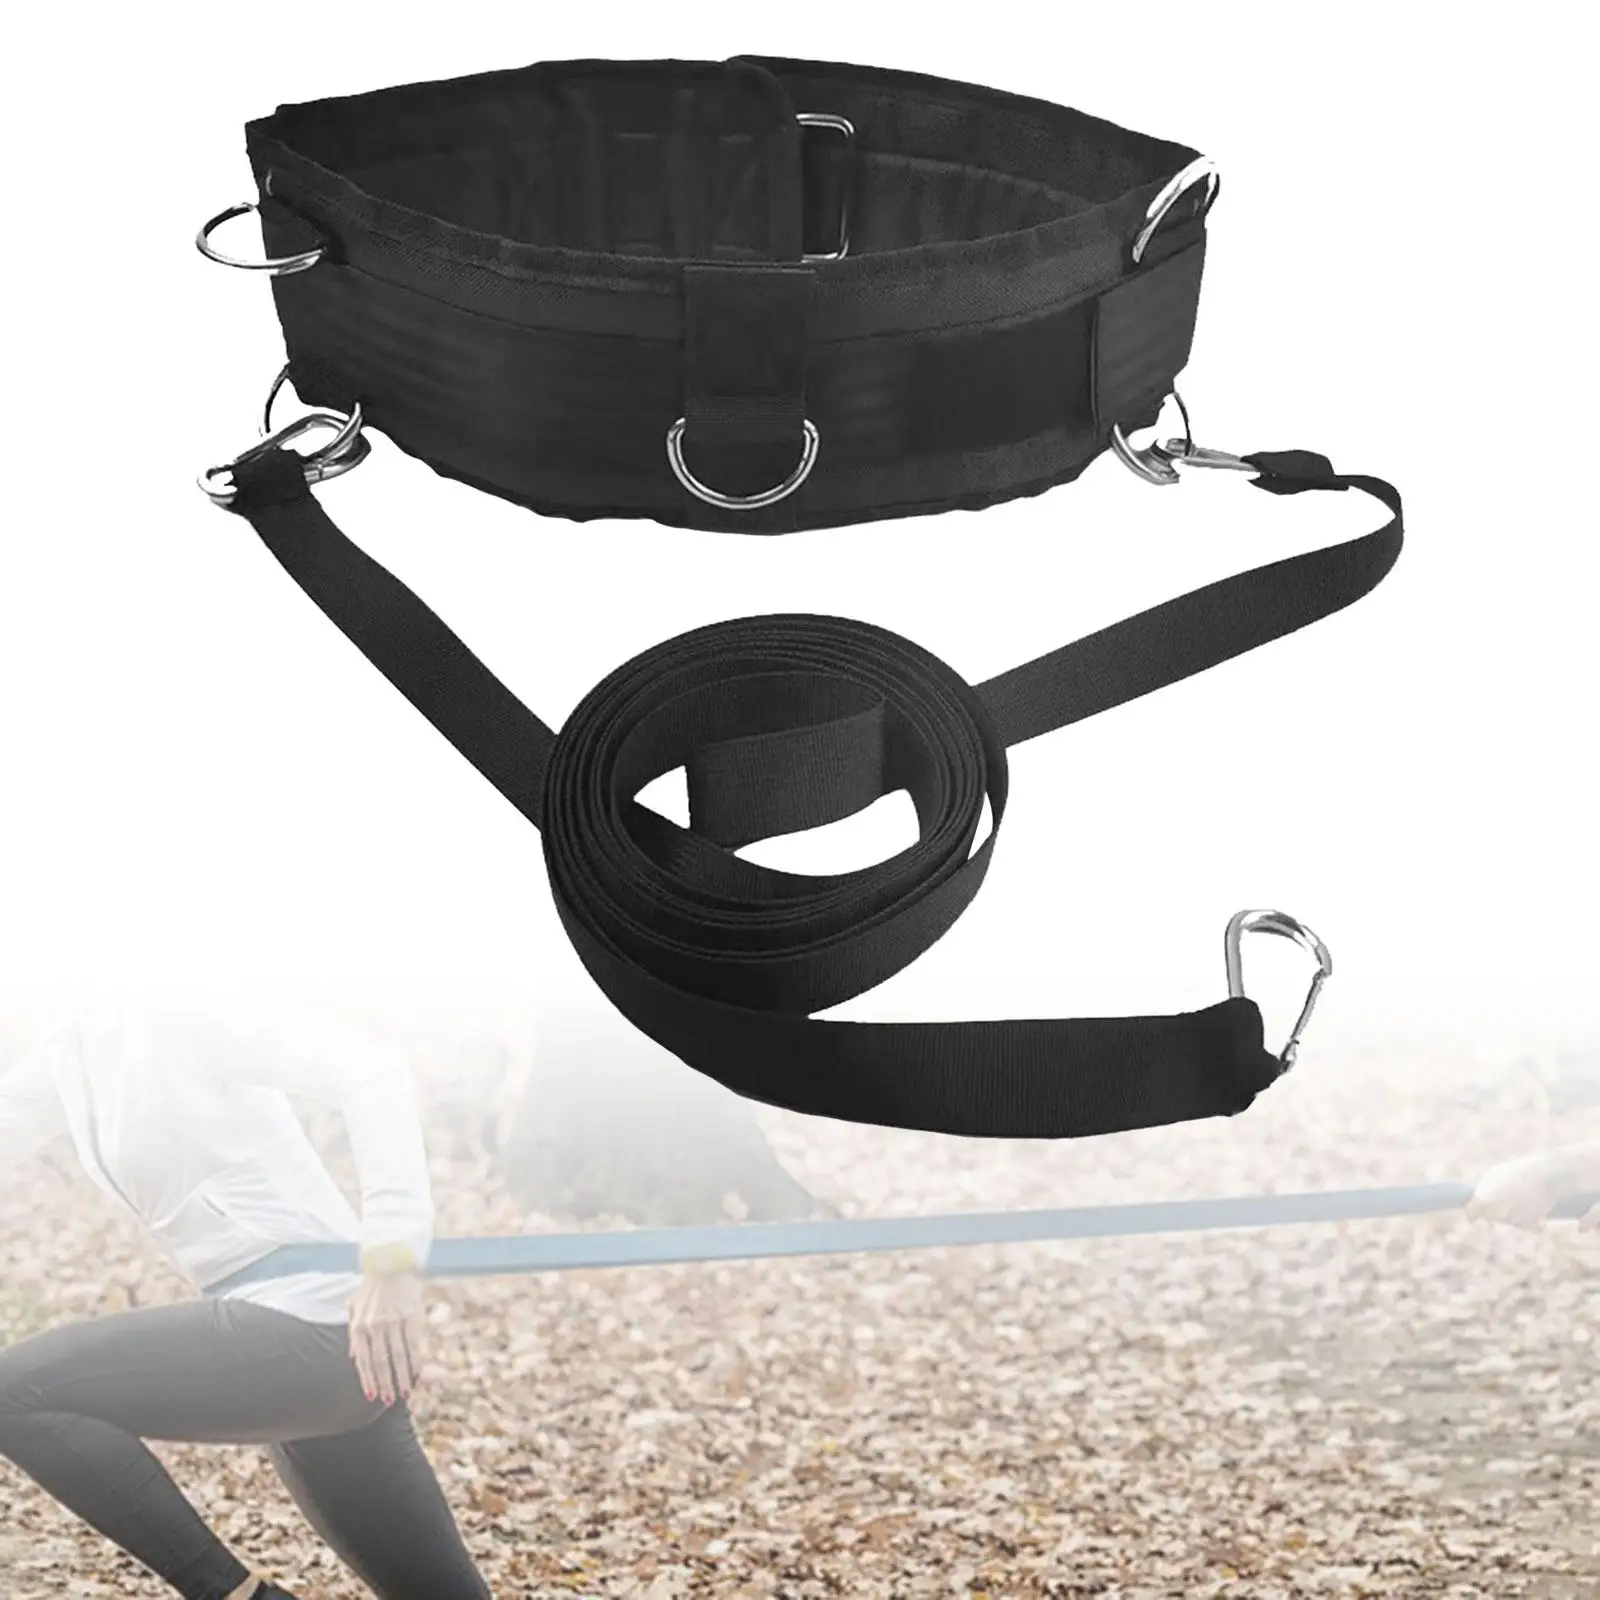 Waist Belt for Pulling Sled Trainer Rope Workout Strap Resistance Band for Rugby Football Soccer Strength Speed Agility Training